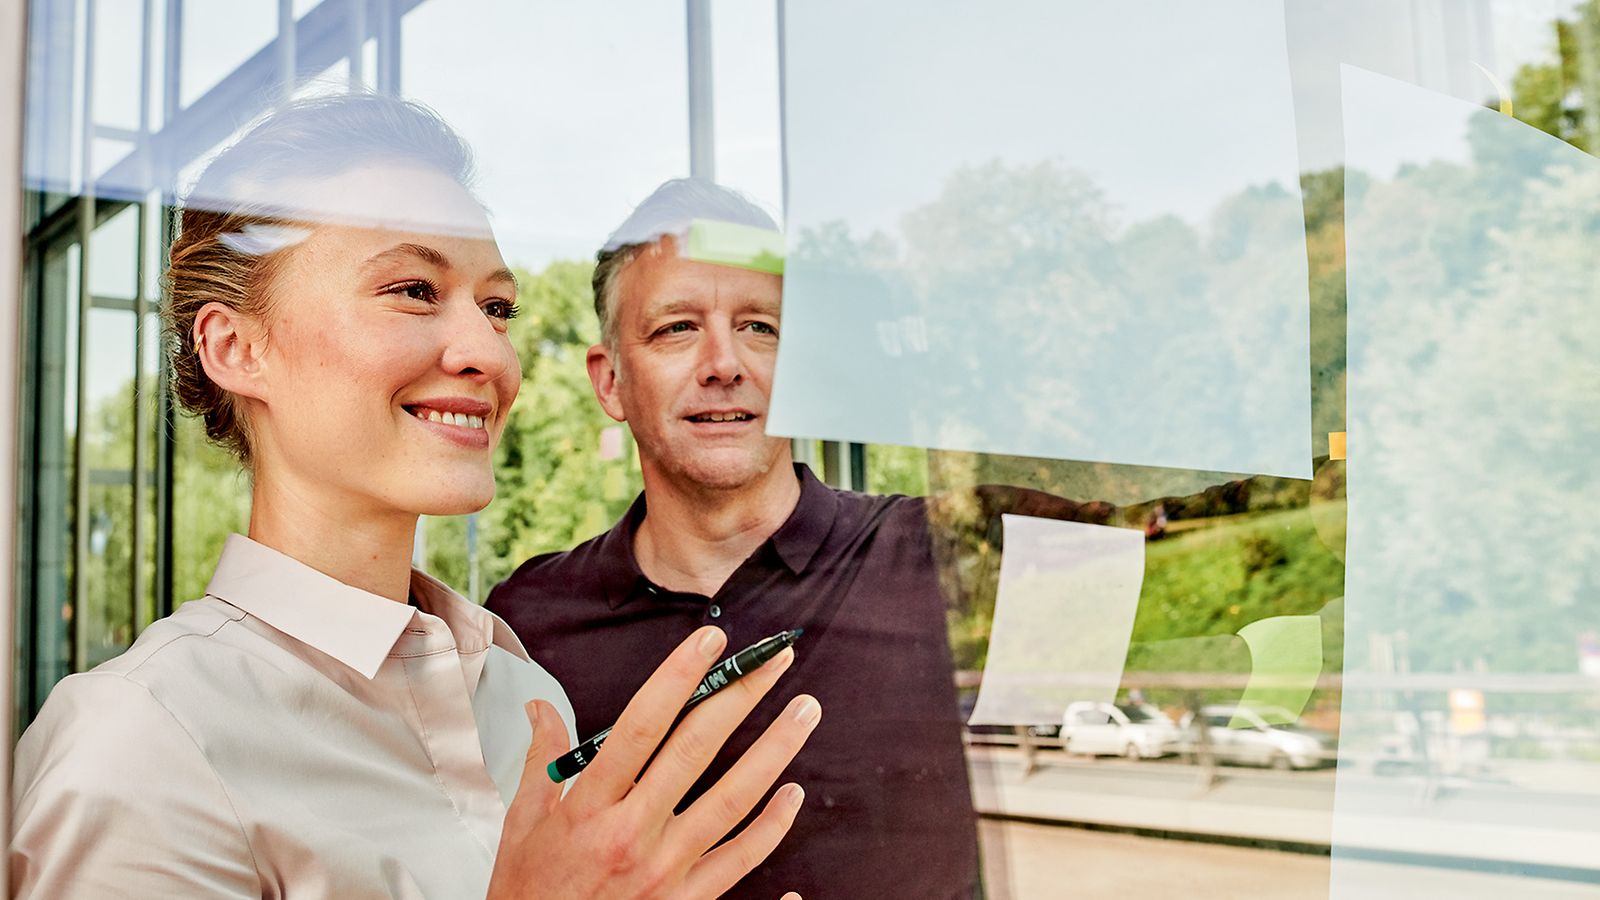 A man and a woman stand in front of a glass wall, joyfully pointing to plans and notes on the glass wall